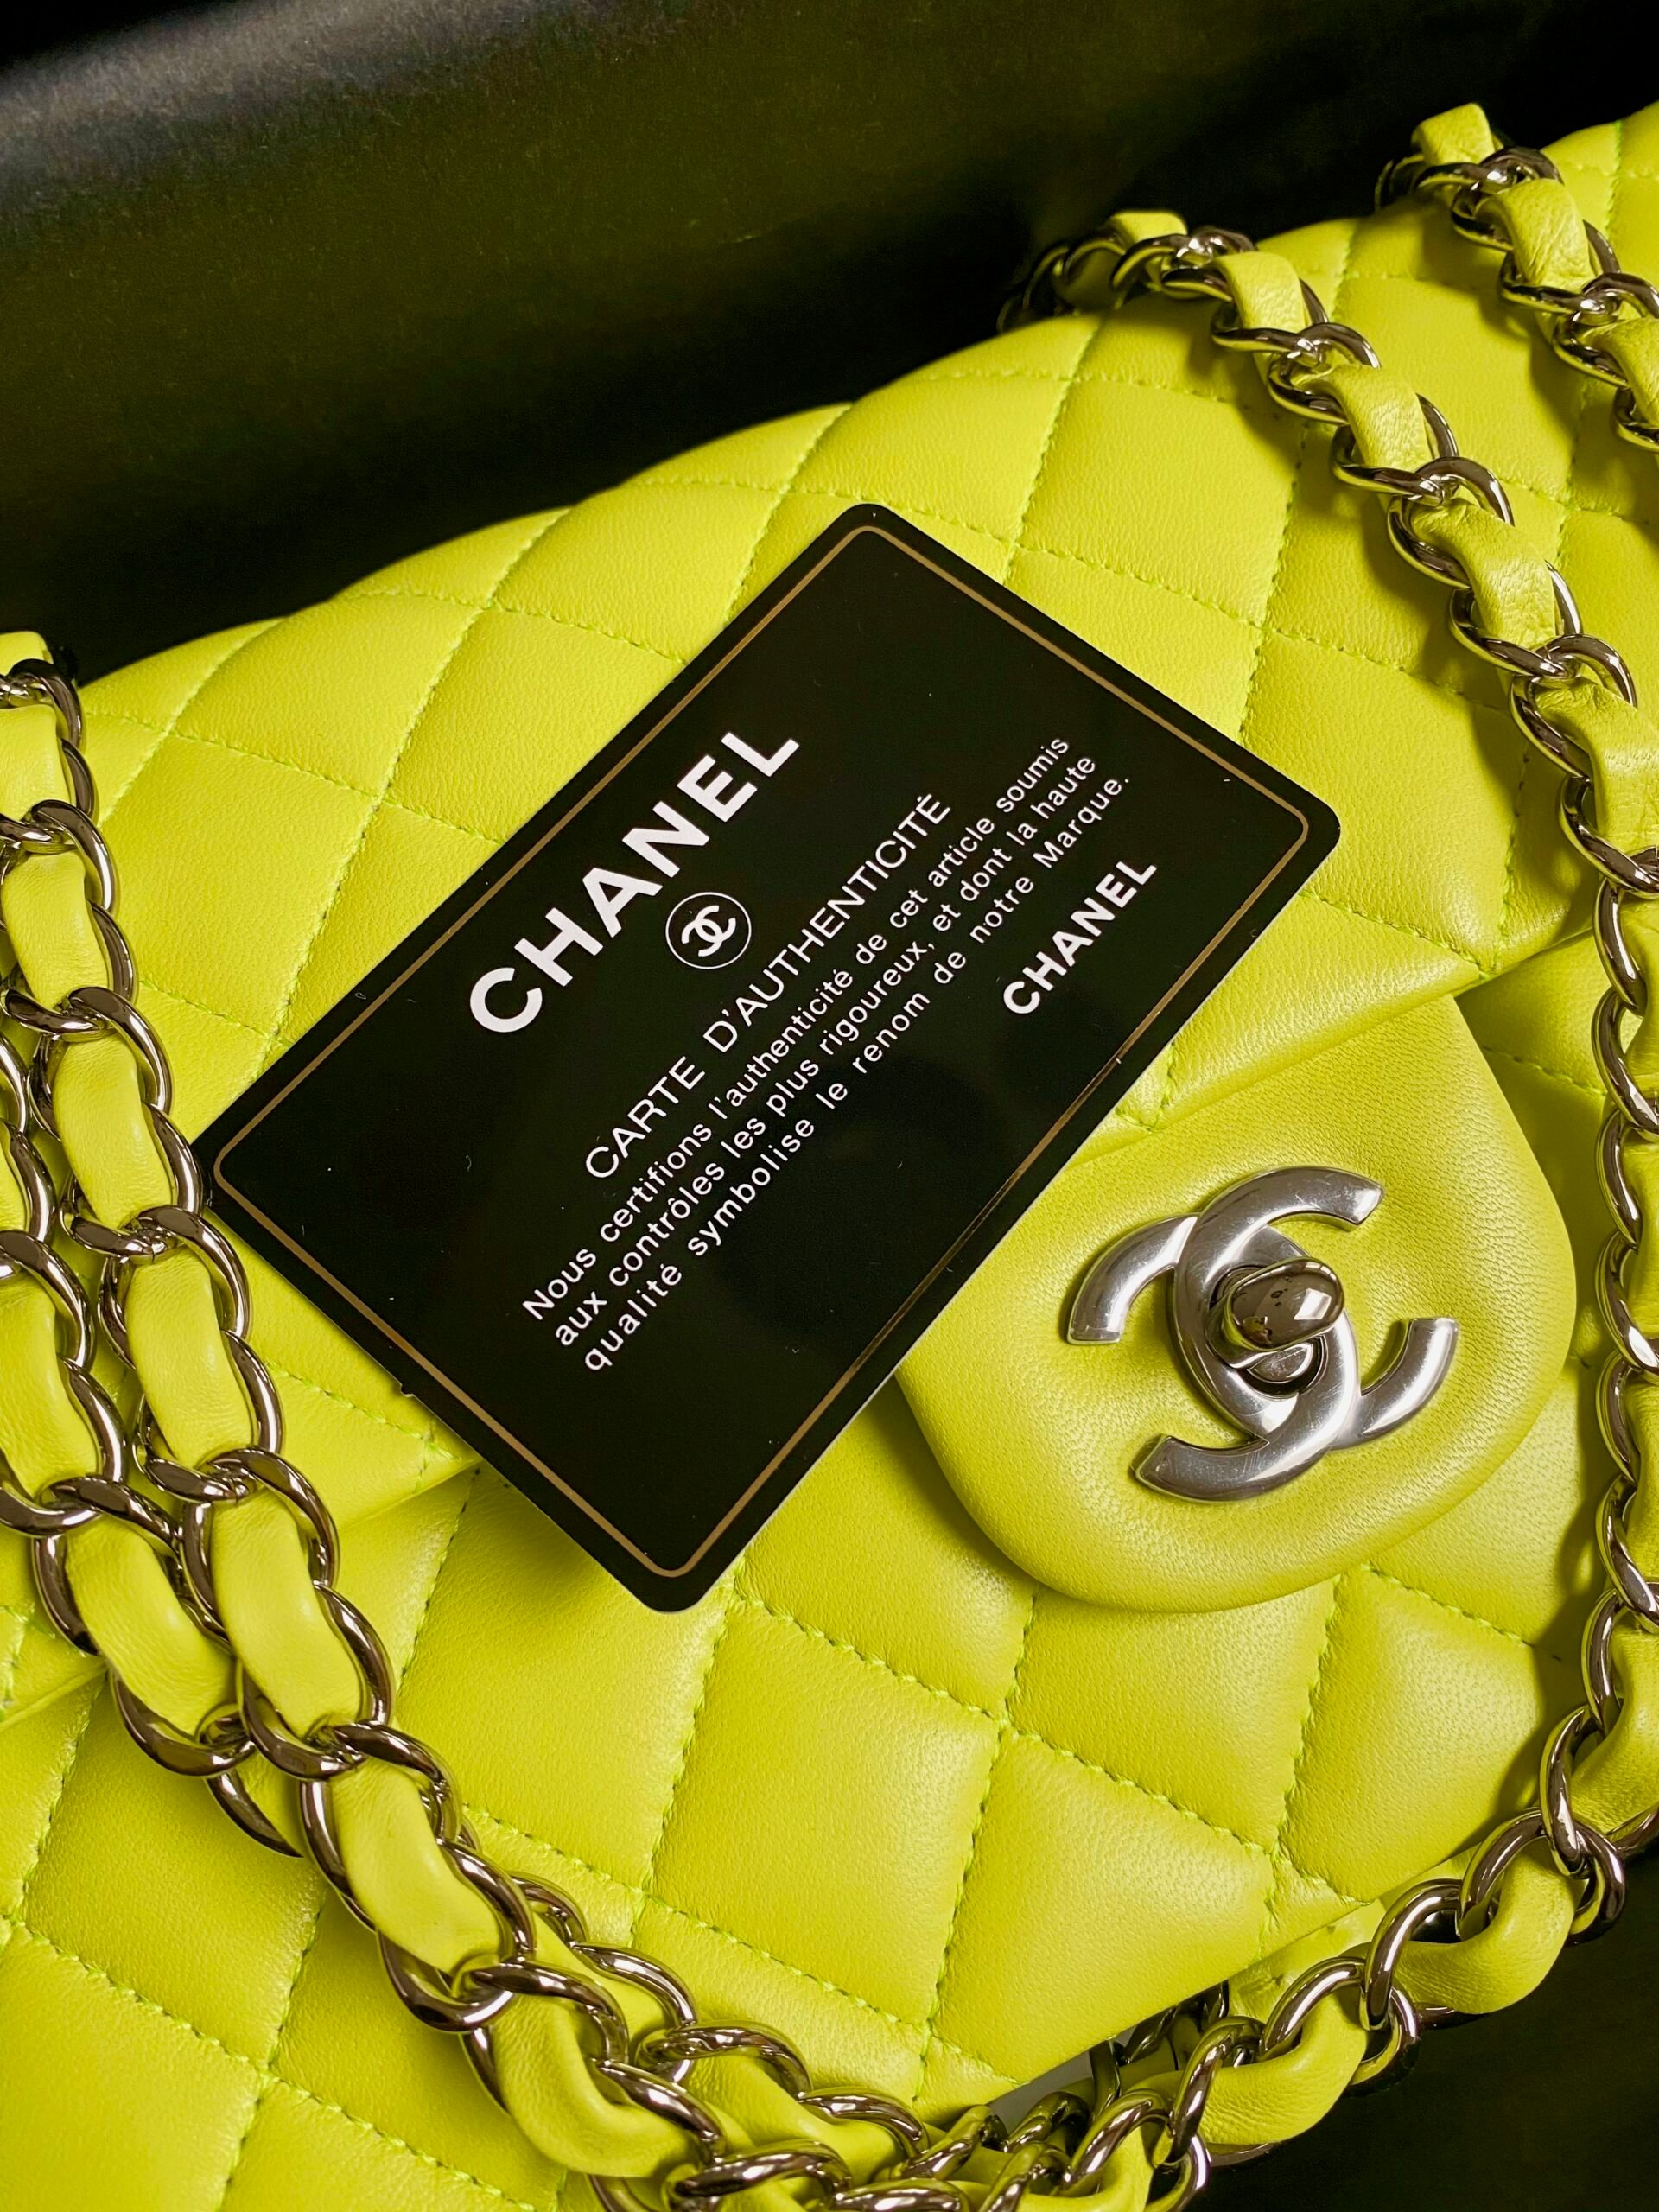 Chanel Ditches its Authentication Card - Still in fashion